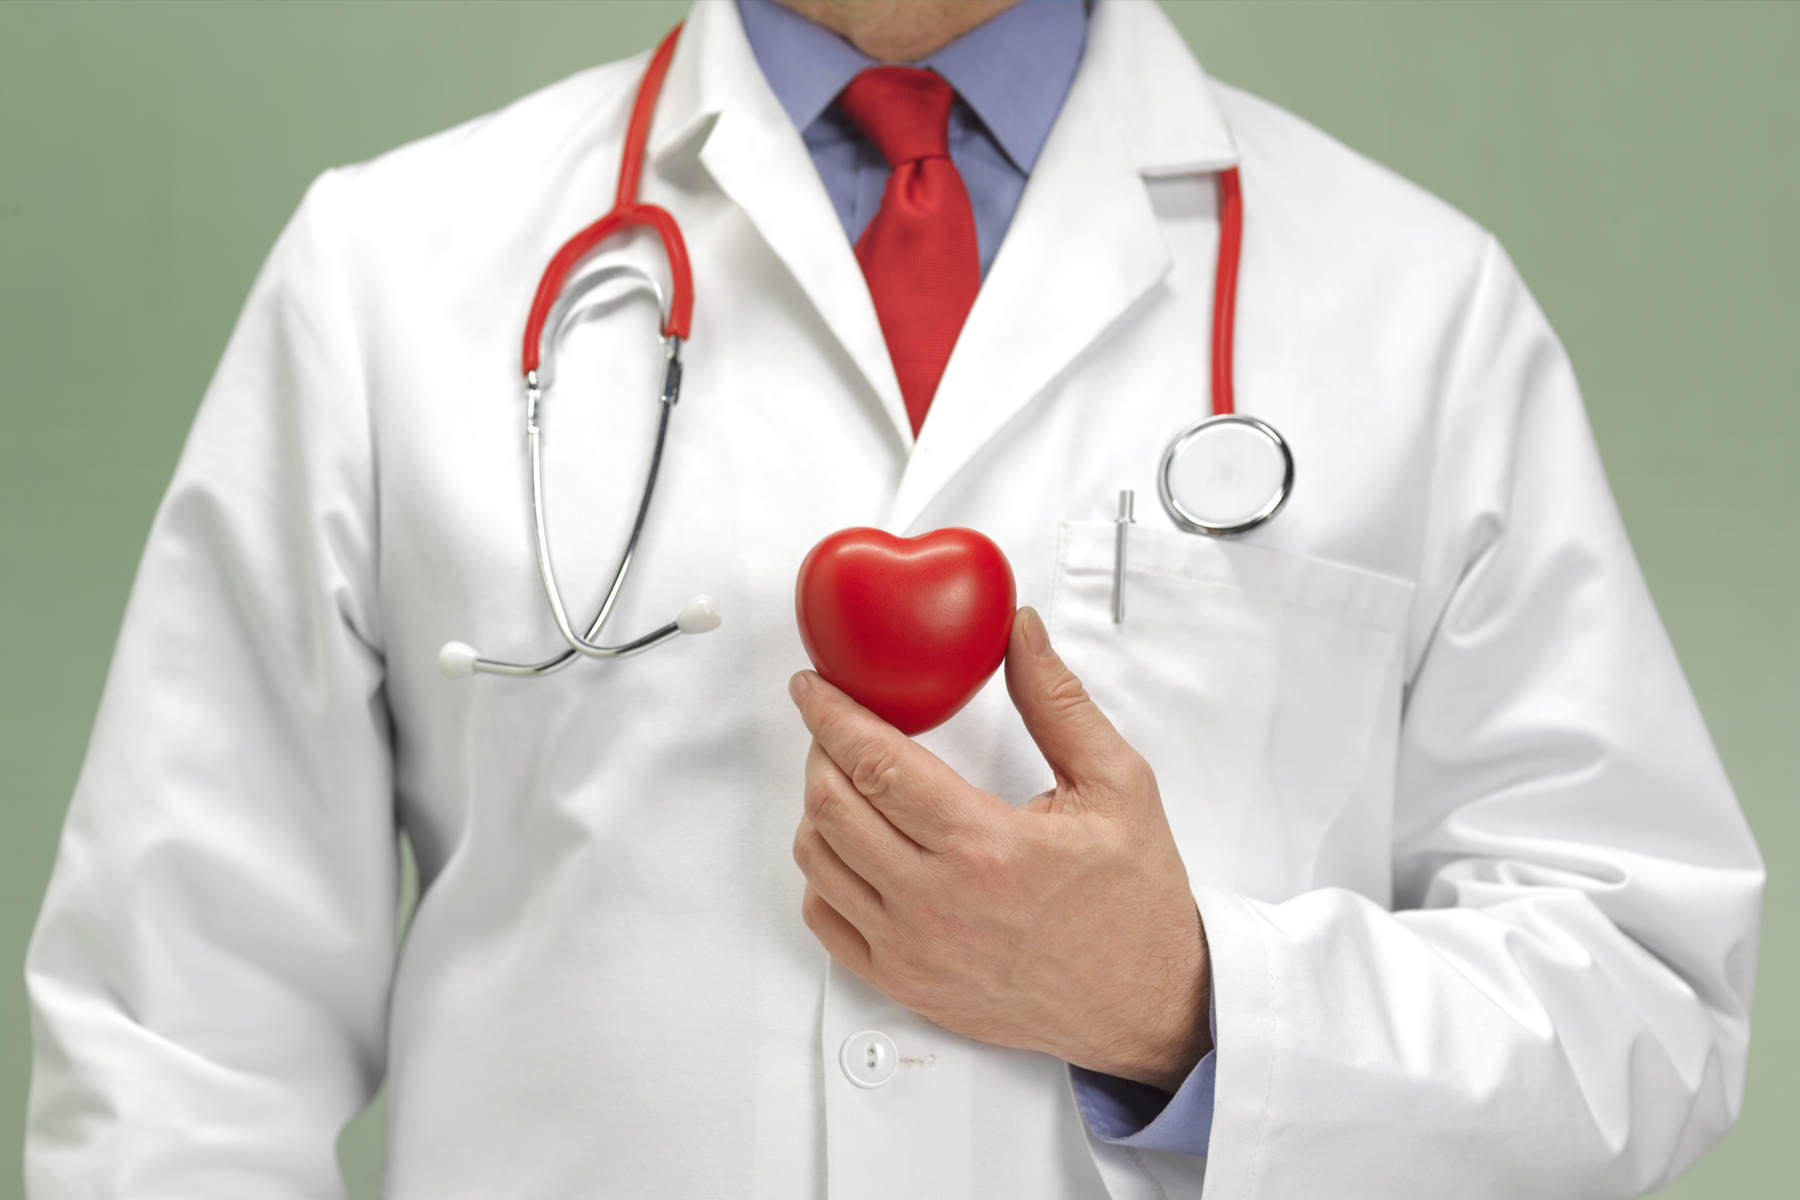 Heart Diseases Should Be Treated With Care